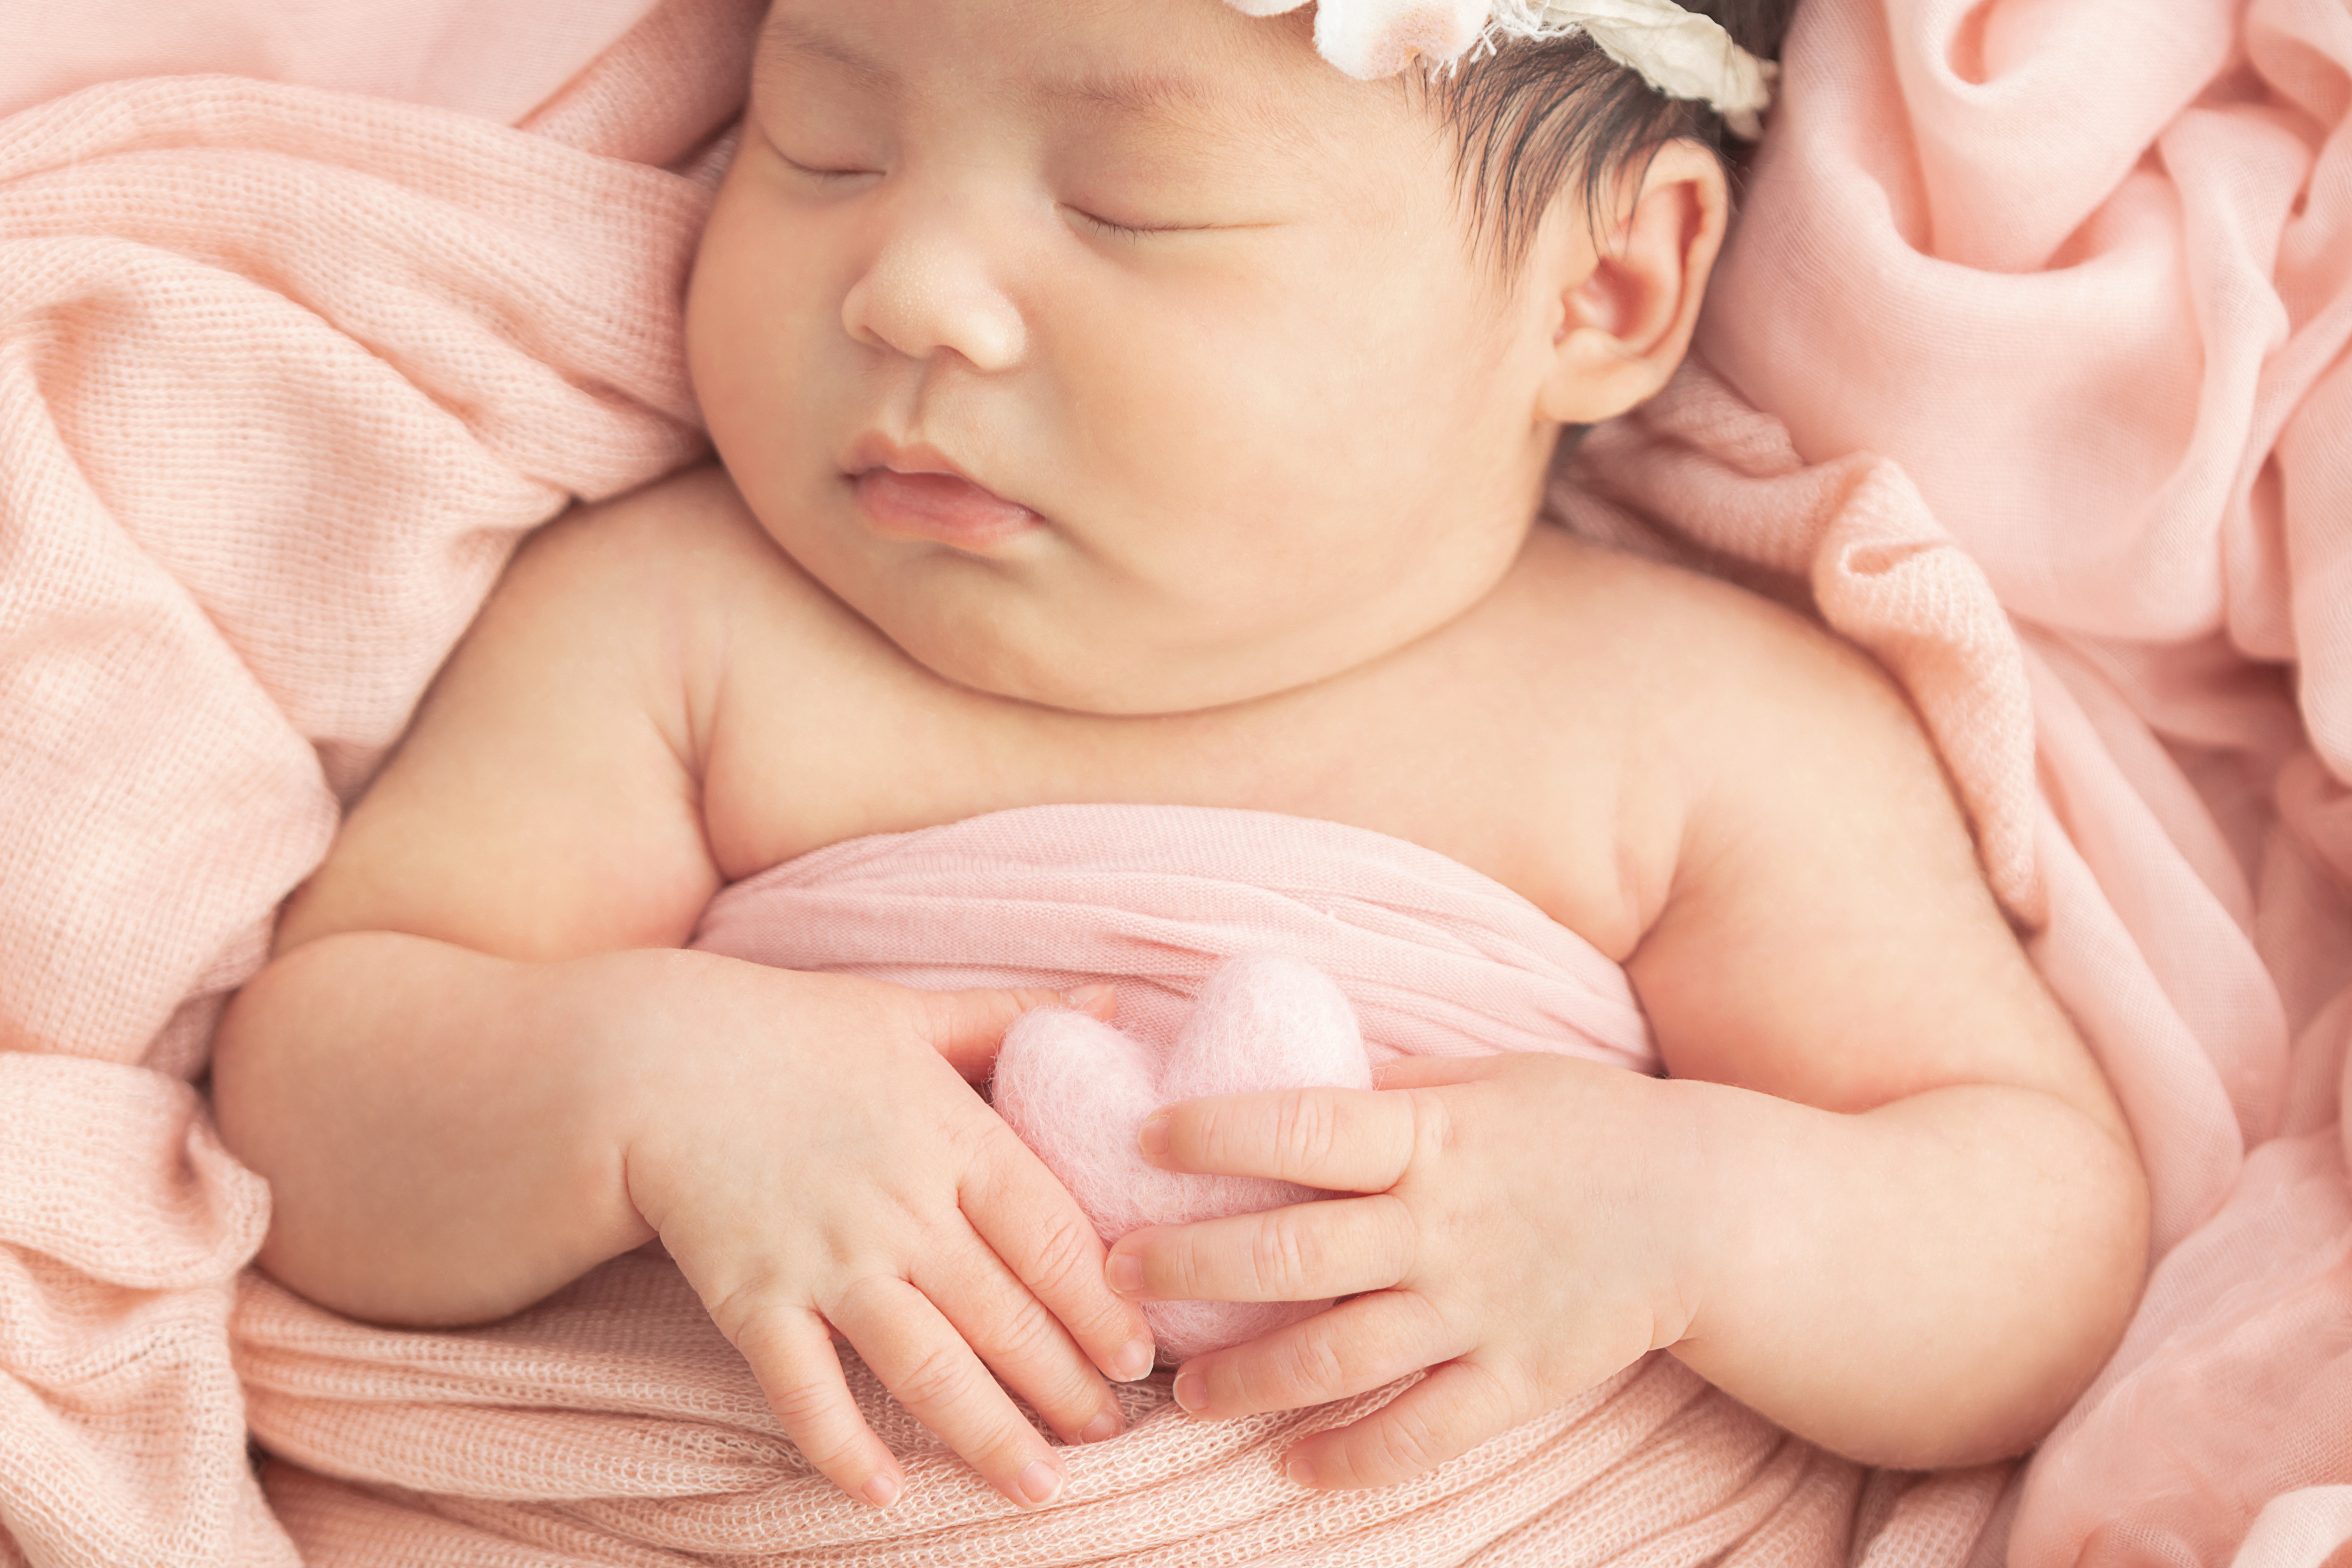 chunky newborn baby with her hands gently holding a felted peachy pink heart, napping on a peachy pink swaddle wrap